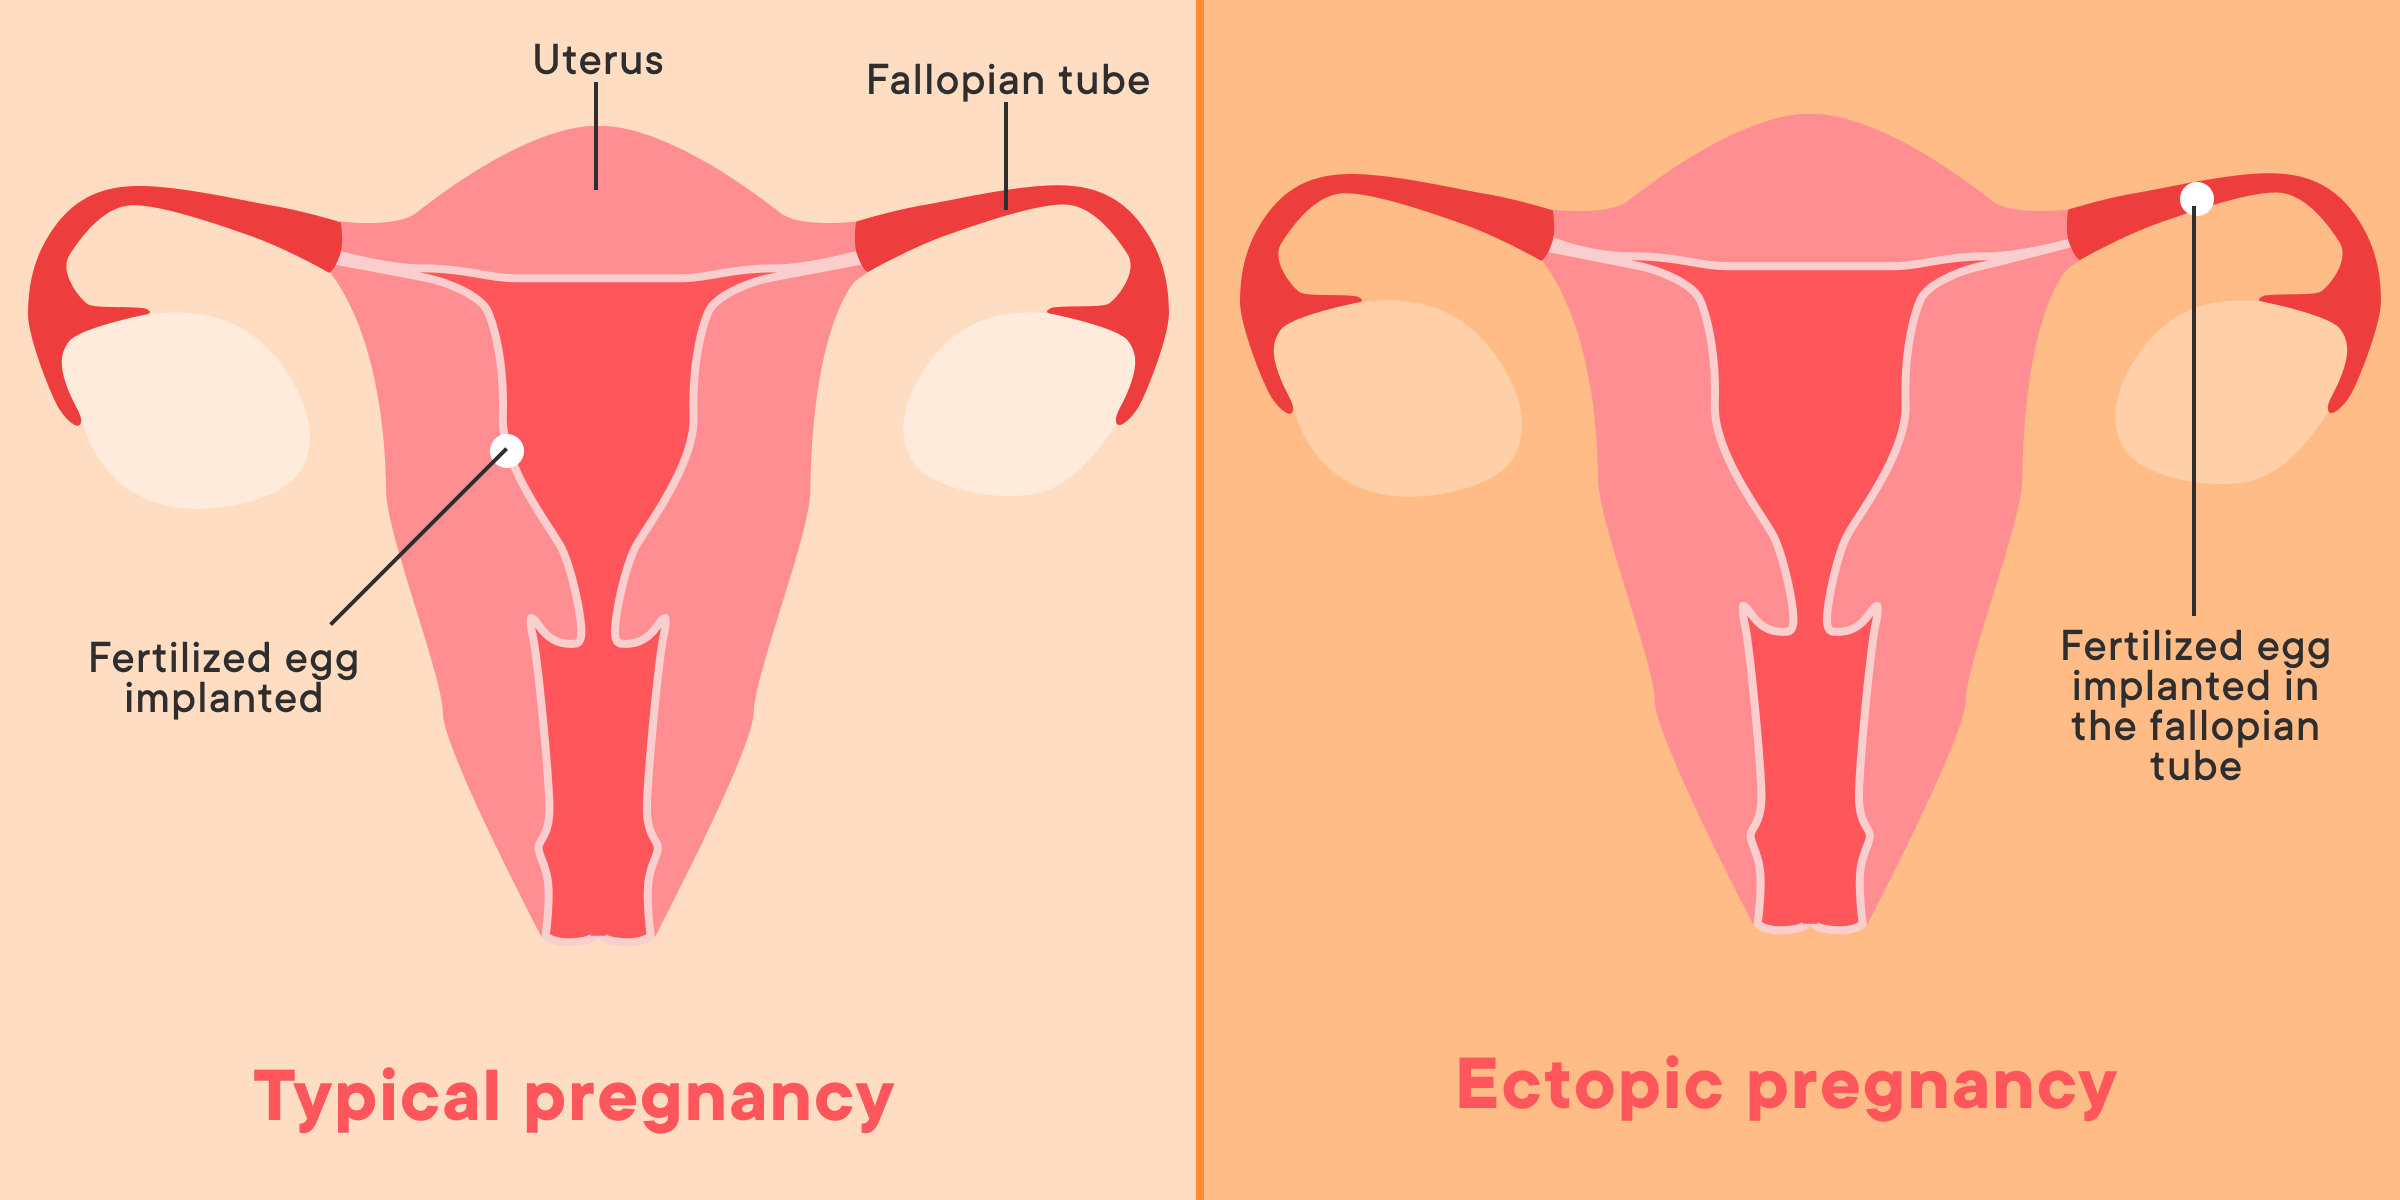 What Is An Ectopic Pregnancy And How Does The US Abortion Ban Affect Such Cases?